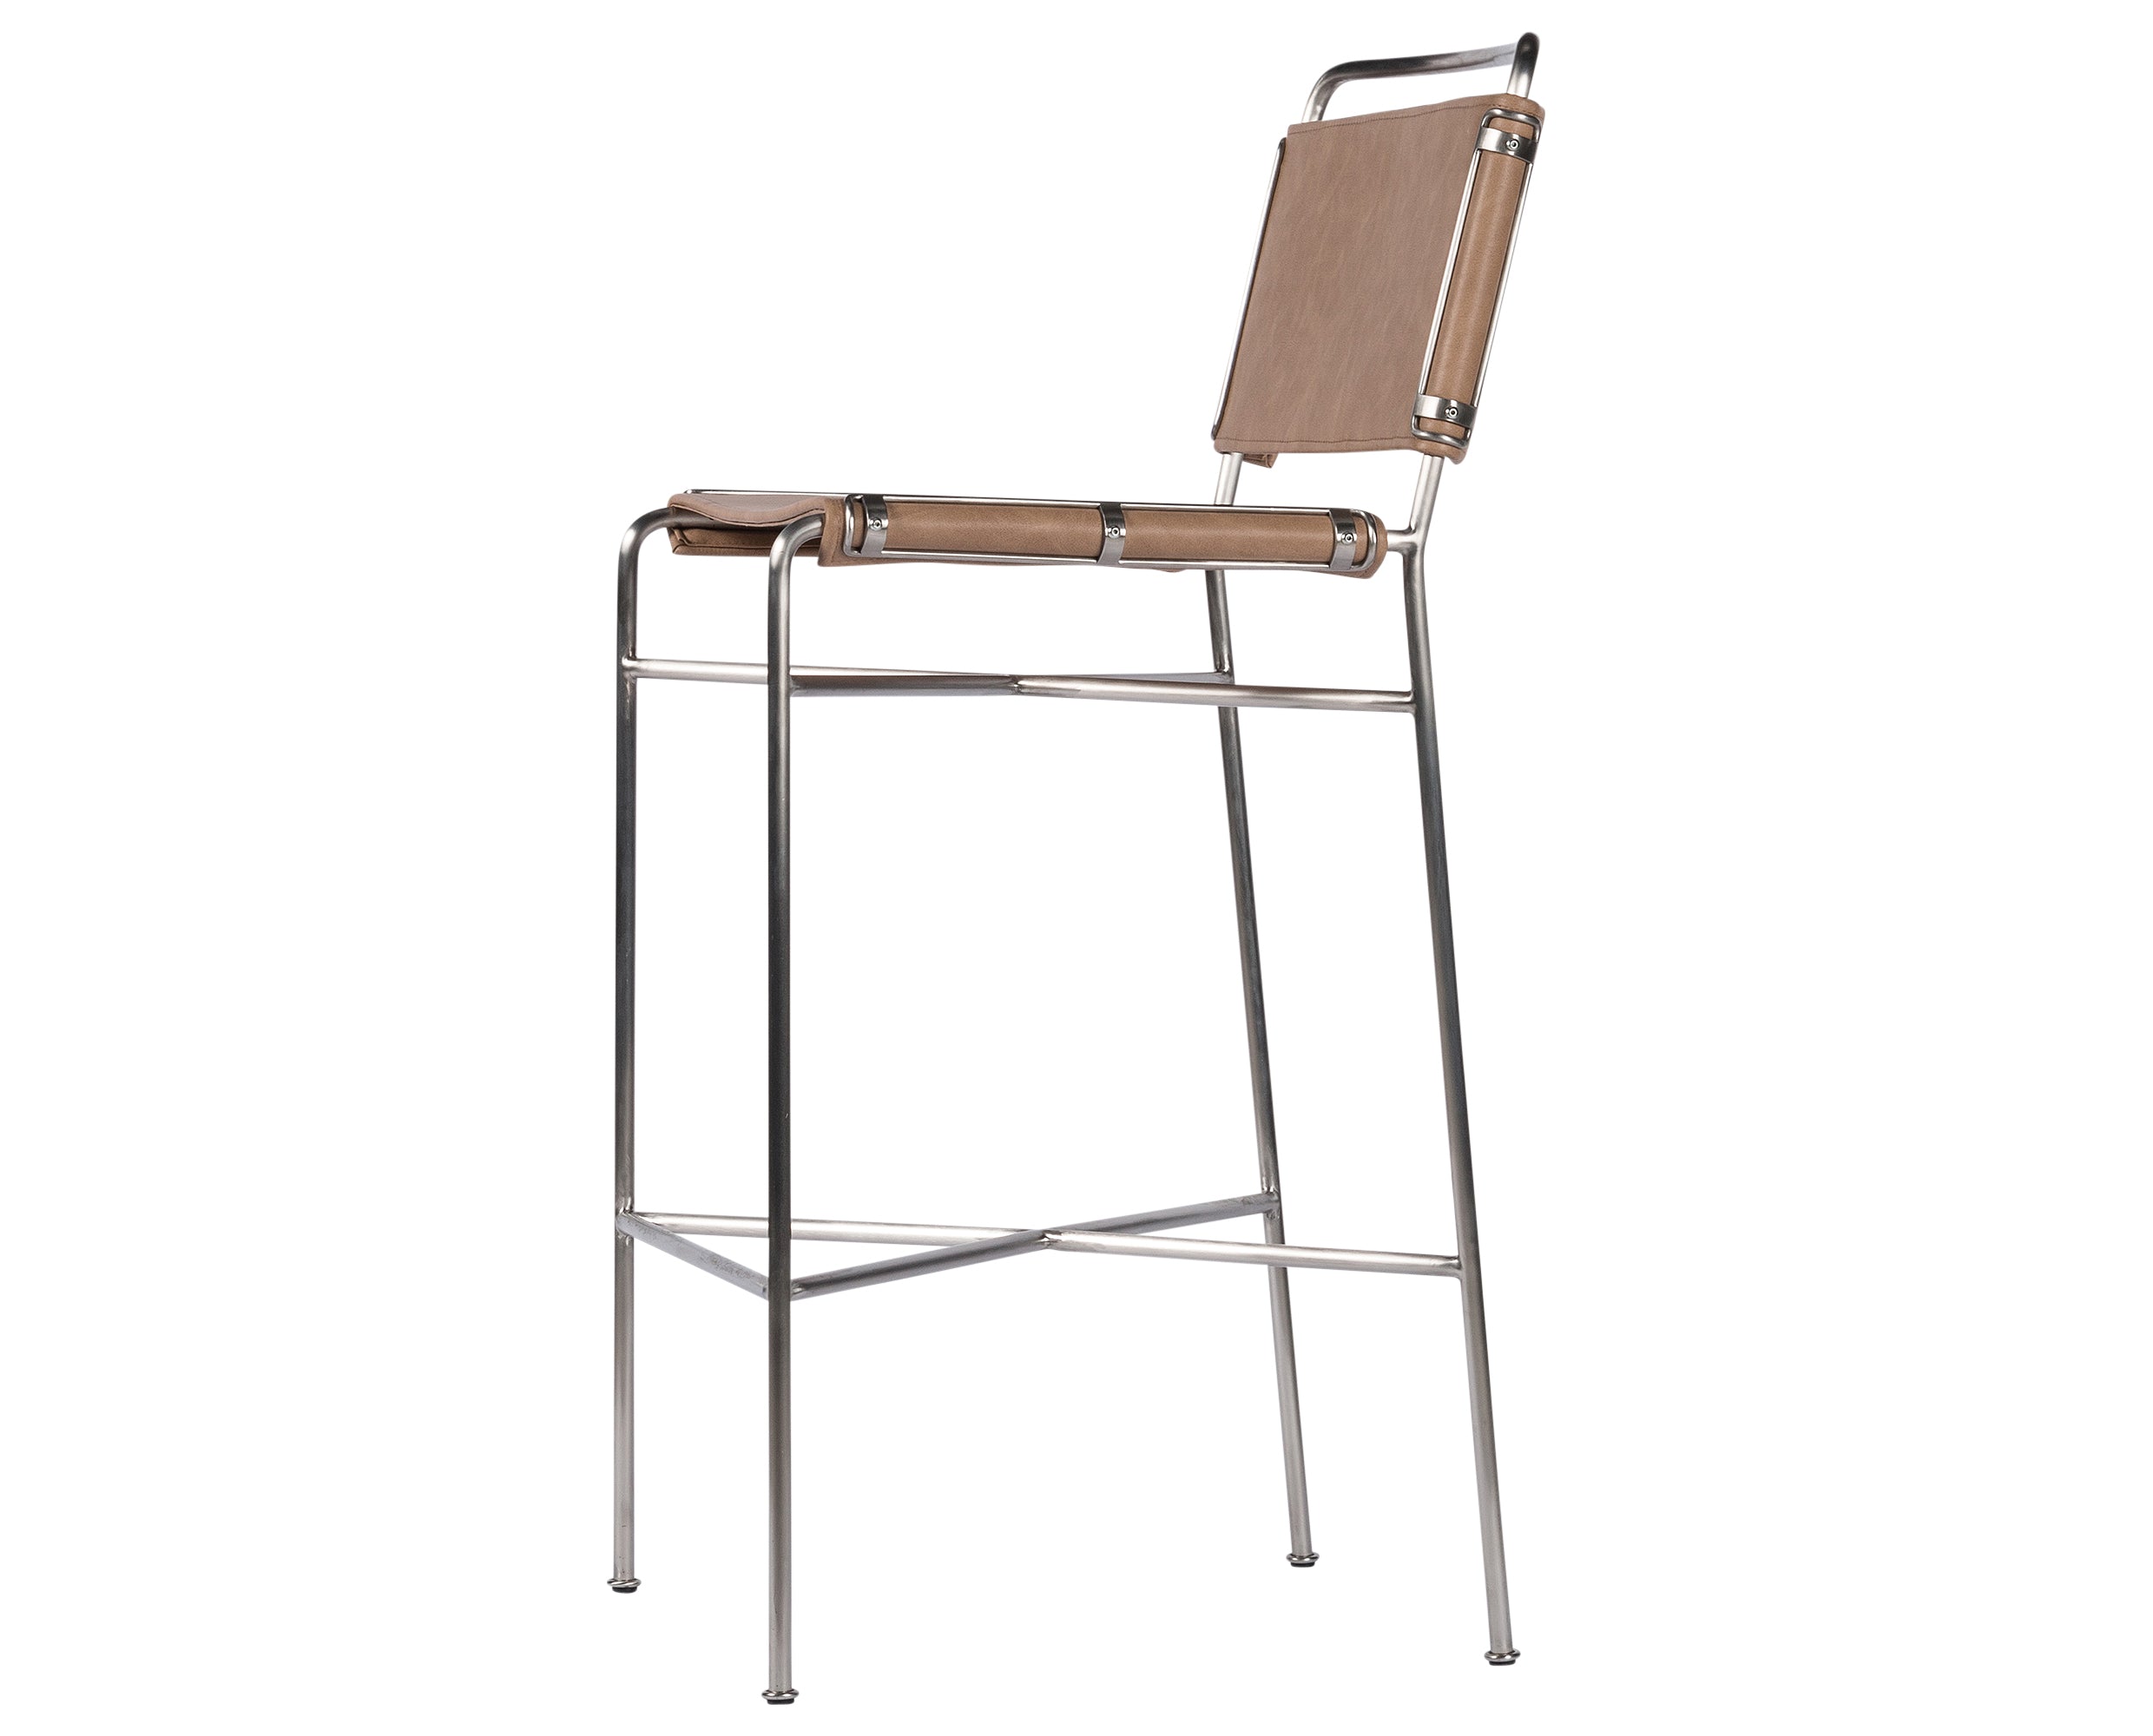 Sierra Nude Faux Leather with Brushed Stainless Steel (Bar Height) | Wharton Bar/Counter Stool | Valley Ridge Furniture